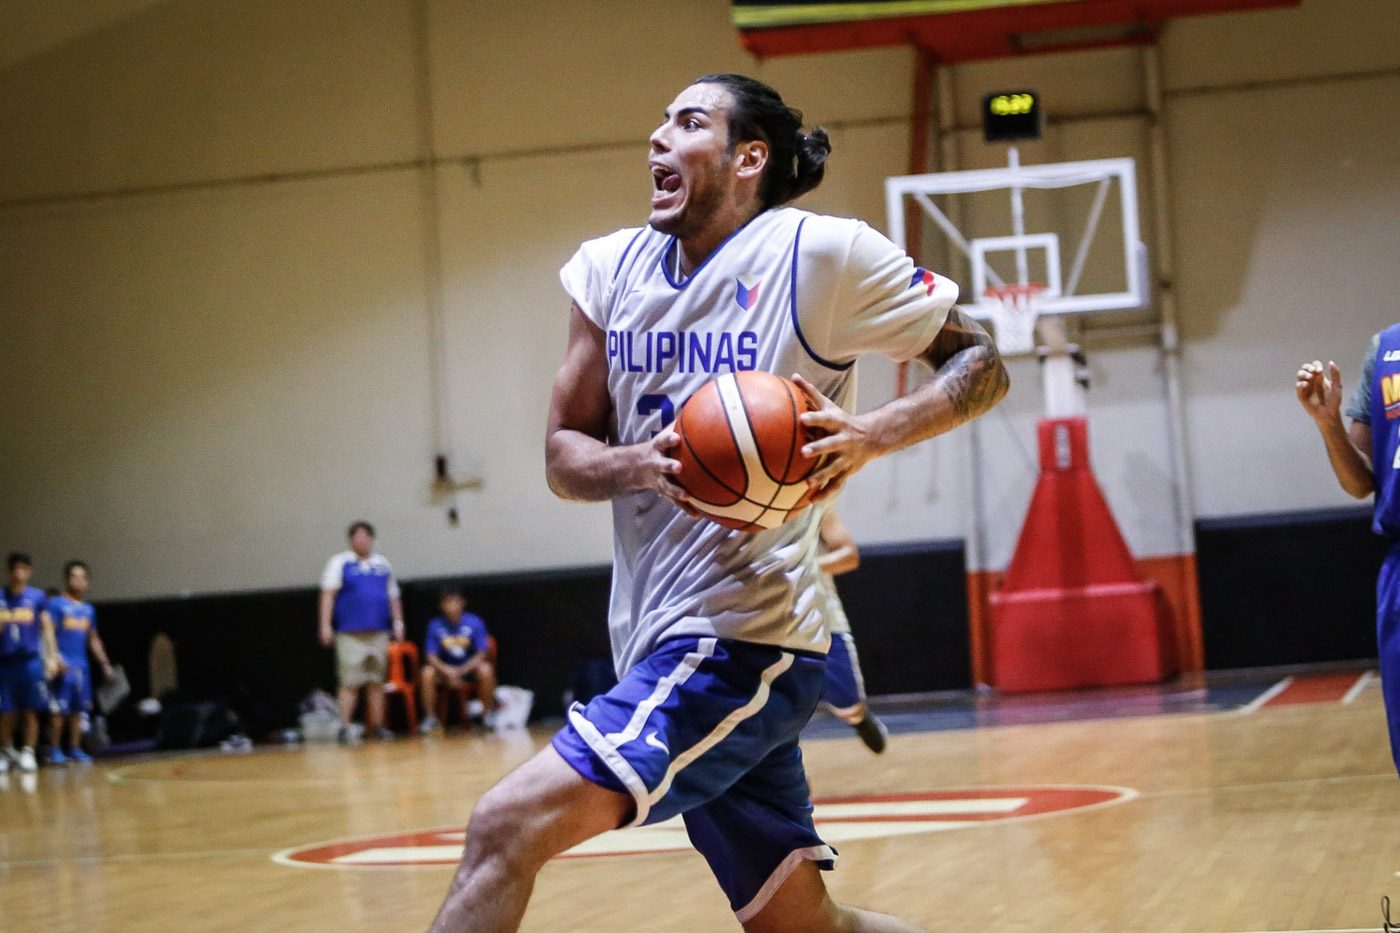 Cruz, Standhardinger ready for battle in Gilas double duty